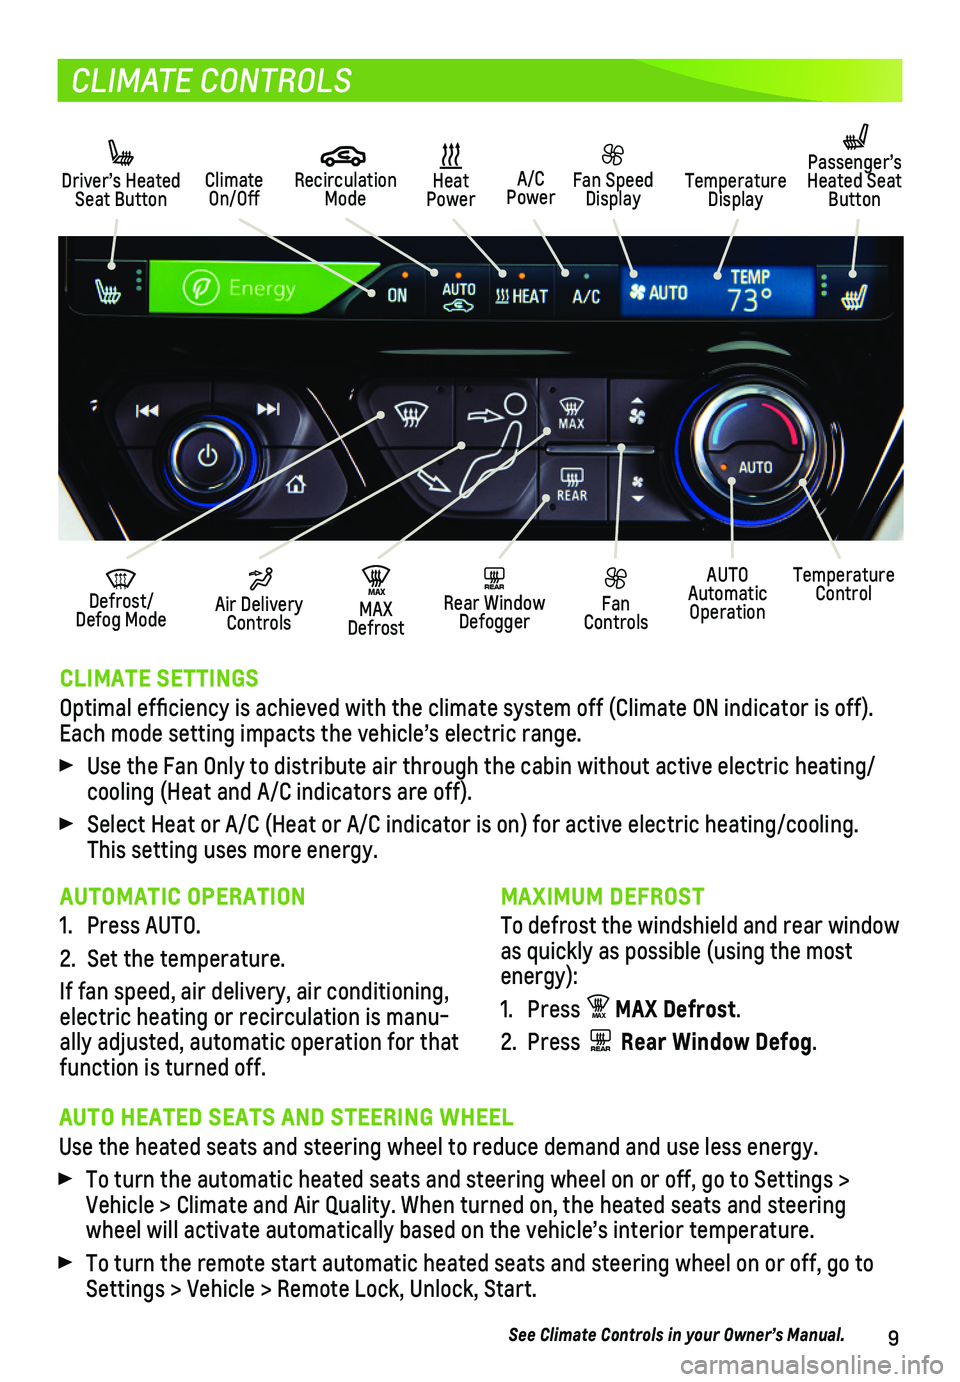 CHEVROLET BOLT EV 2020  Get To Know Guide 9
CLIMATE CONTROLS
CLIMATE SETTINGS 
Optimal efficiency is achieved with the climate system off (Climate O\
N indicator is off). Each mode setting impacts the vehicle’s electric range. 
 Use the Fan